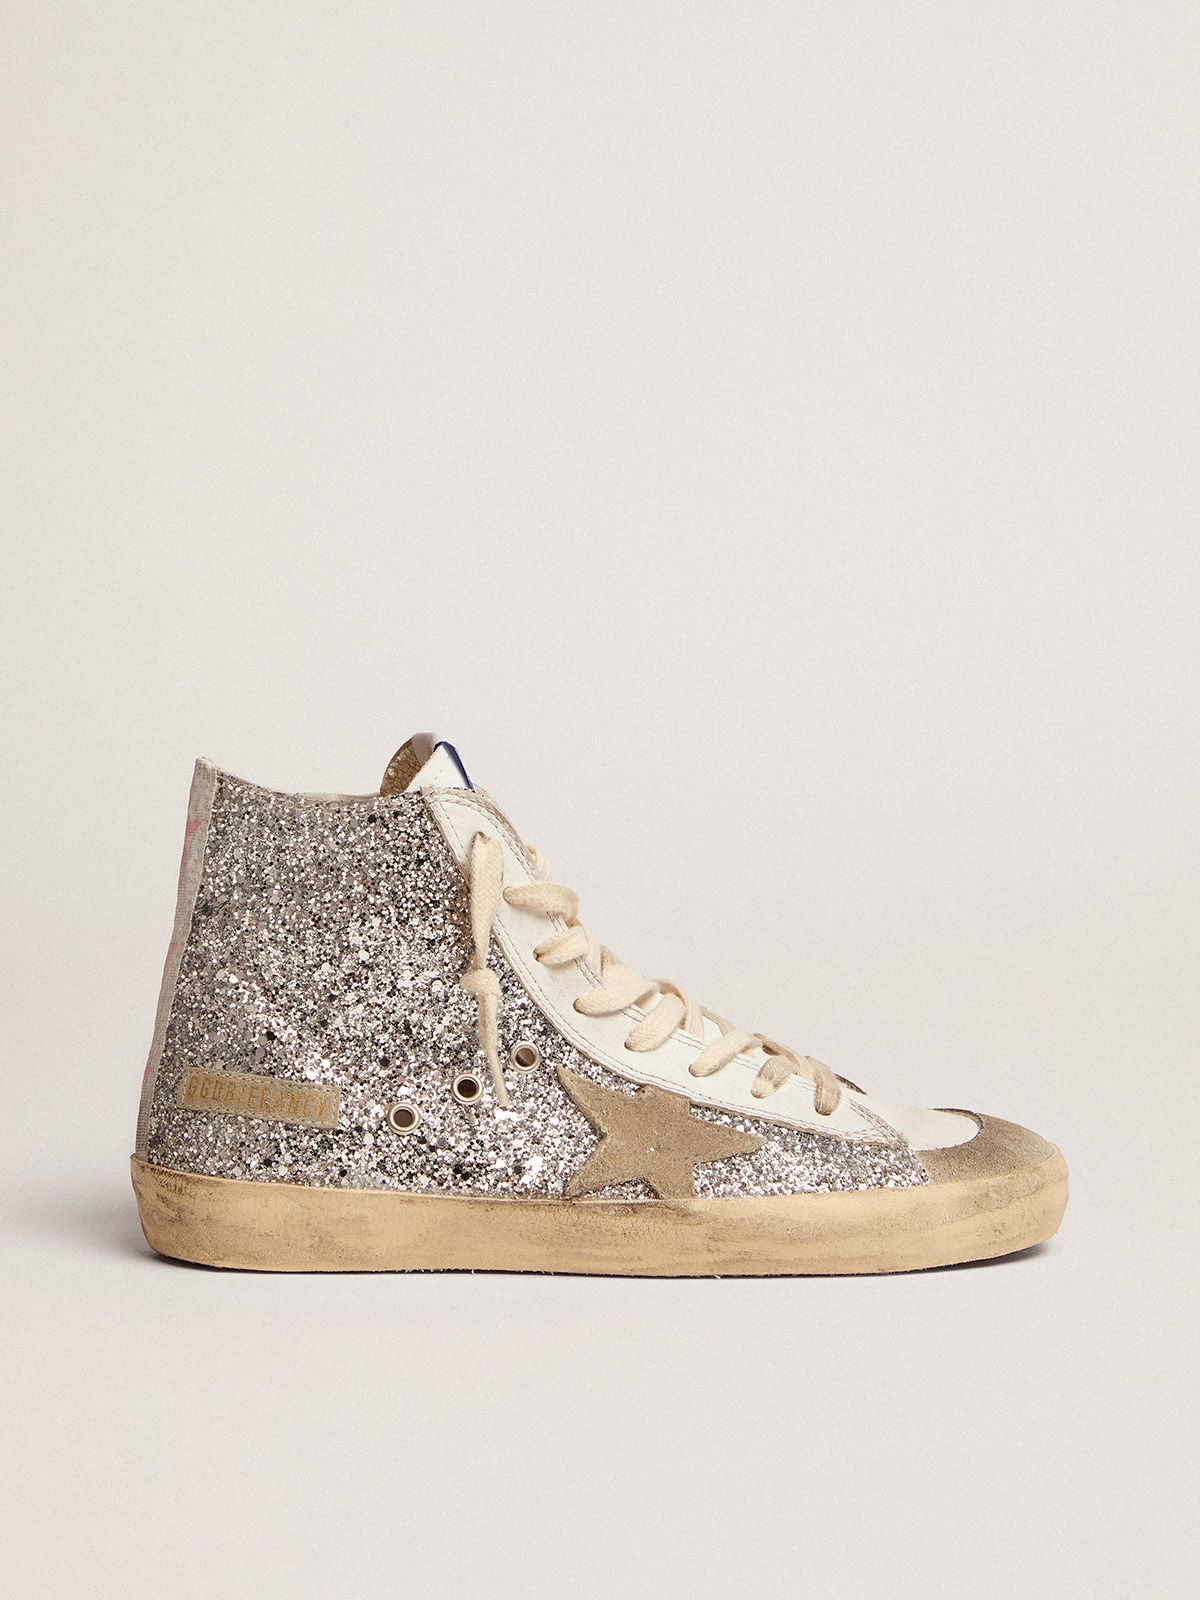 golden goose star suede ice-gray silver Francy upper and with sneakers Penstar glitter